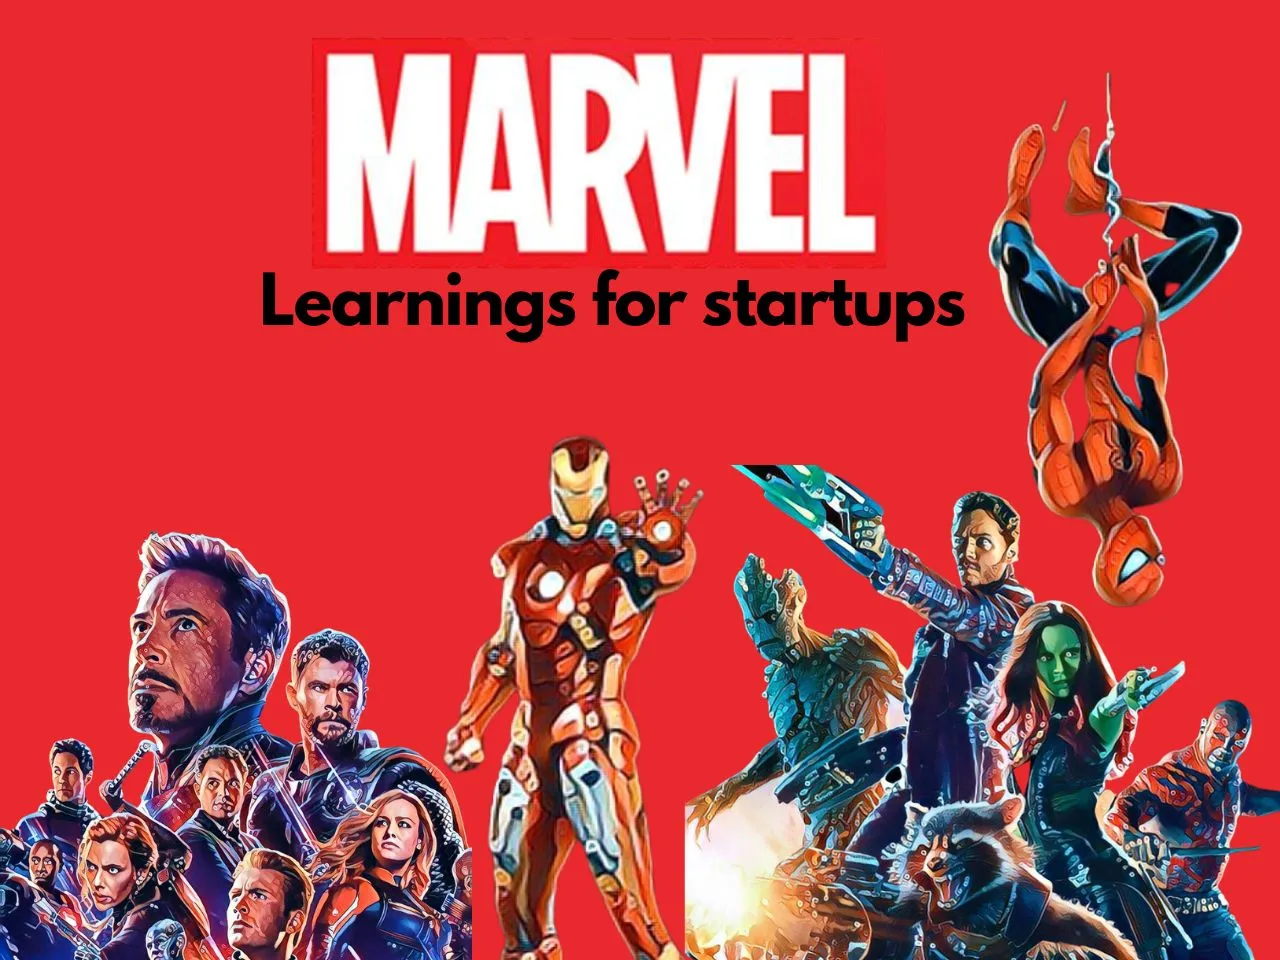 Marvel Cinematic Universe: A Case Study in Startup Success